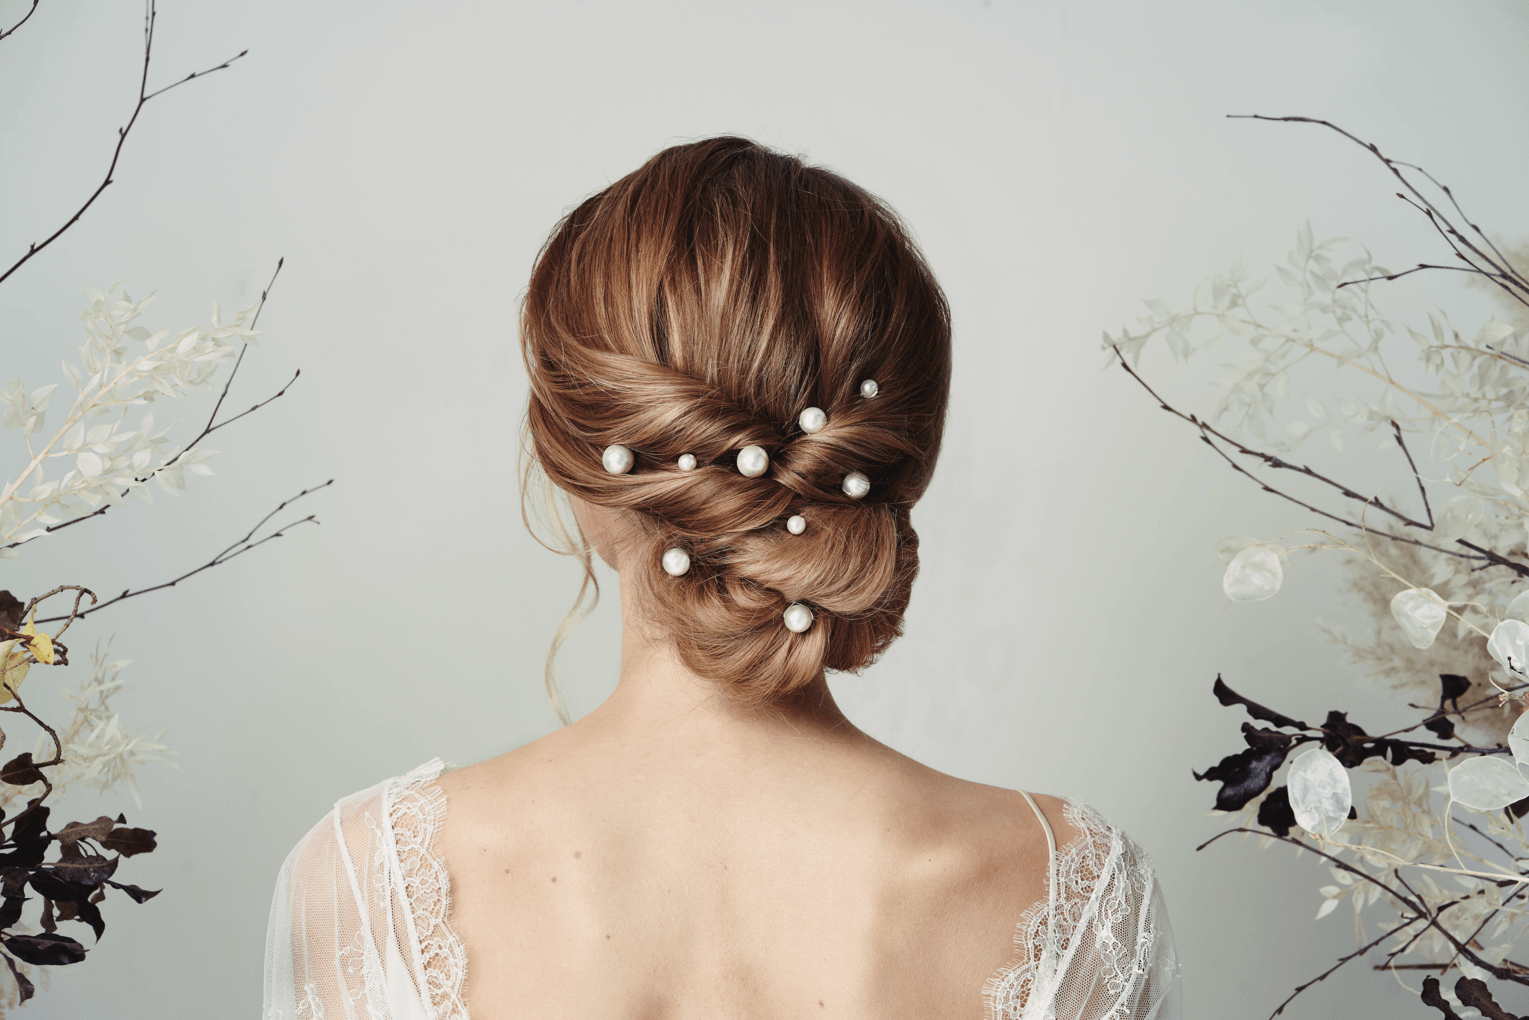 How to style a wedding updo with hairpins - 25 different looks